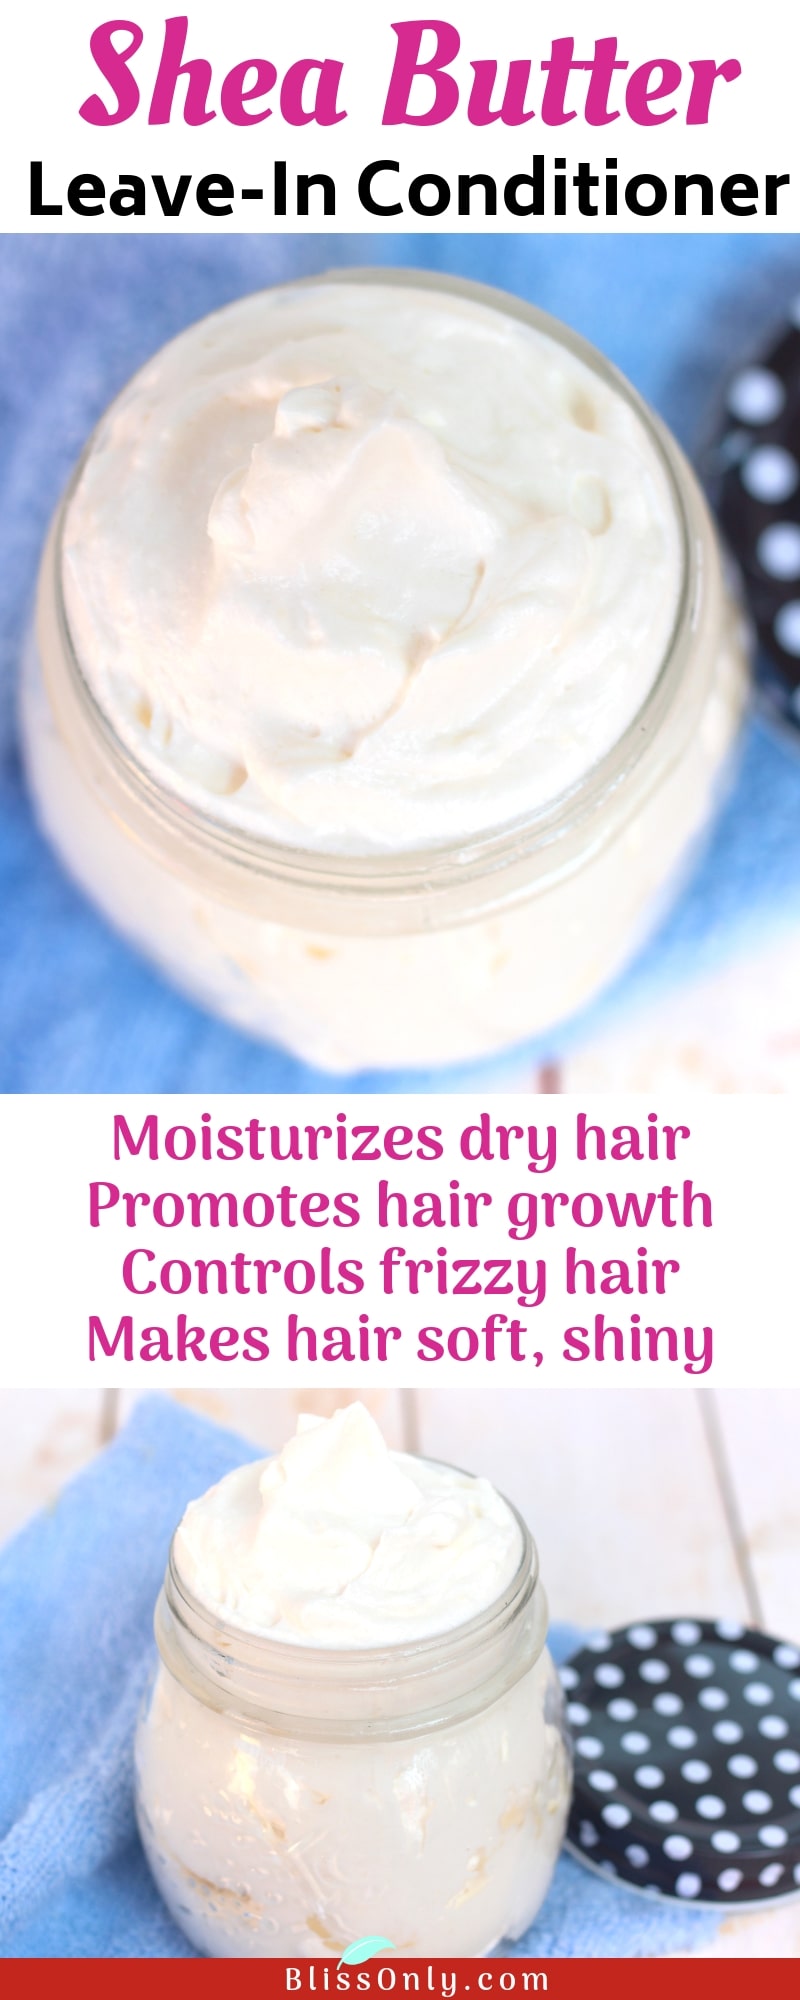 shea butter hair conditioner